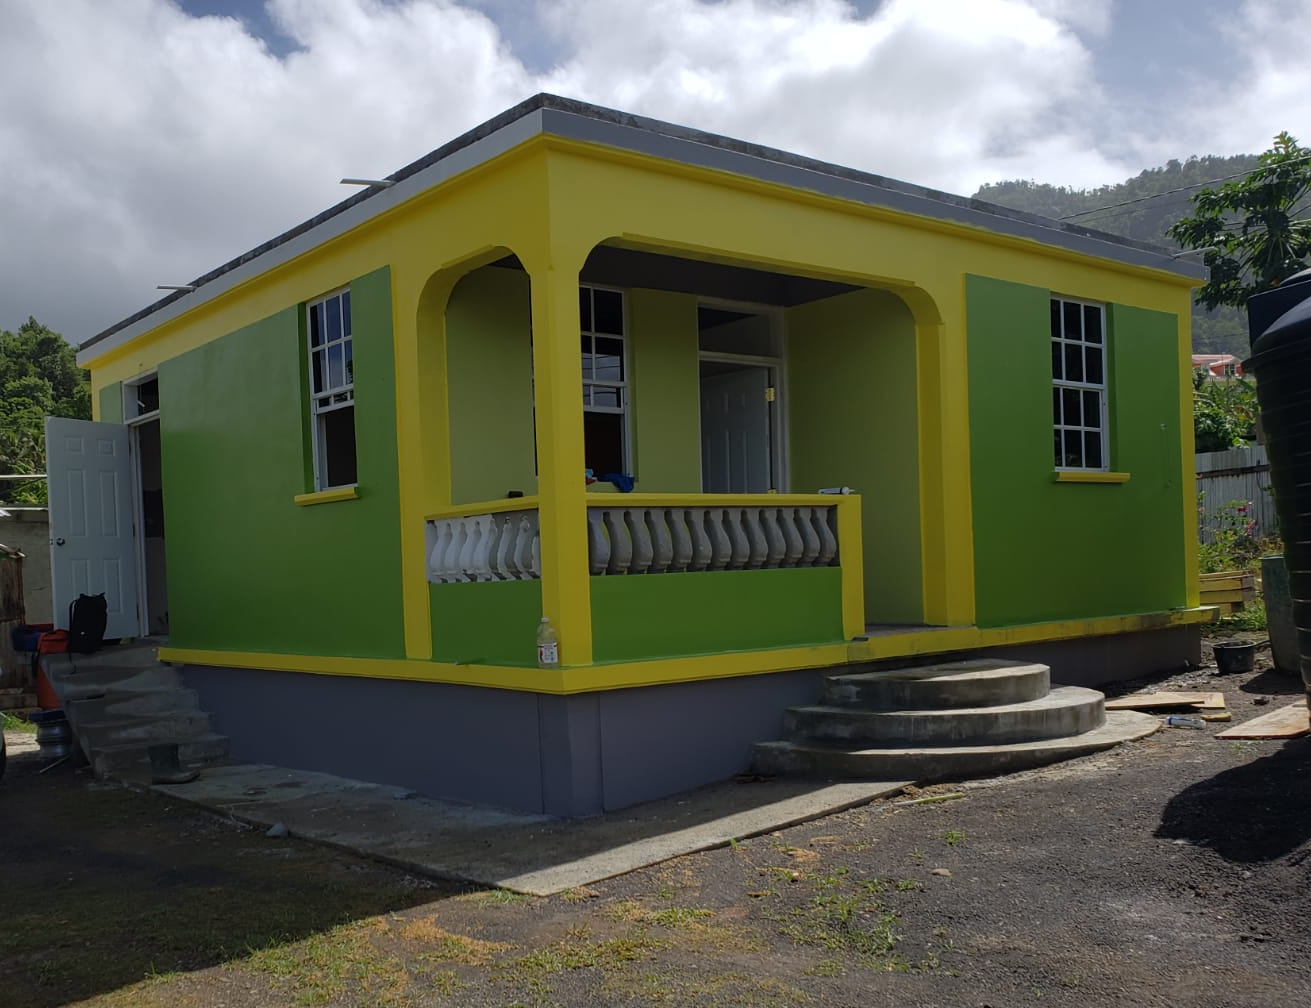 Building Back Better – climate resilient housing for the most vulnerable who lost their homes in the devastating hurricane Maria in September 2017